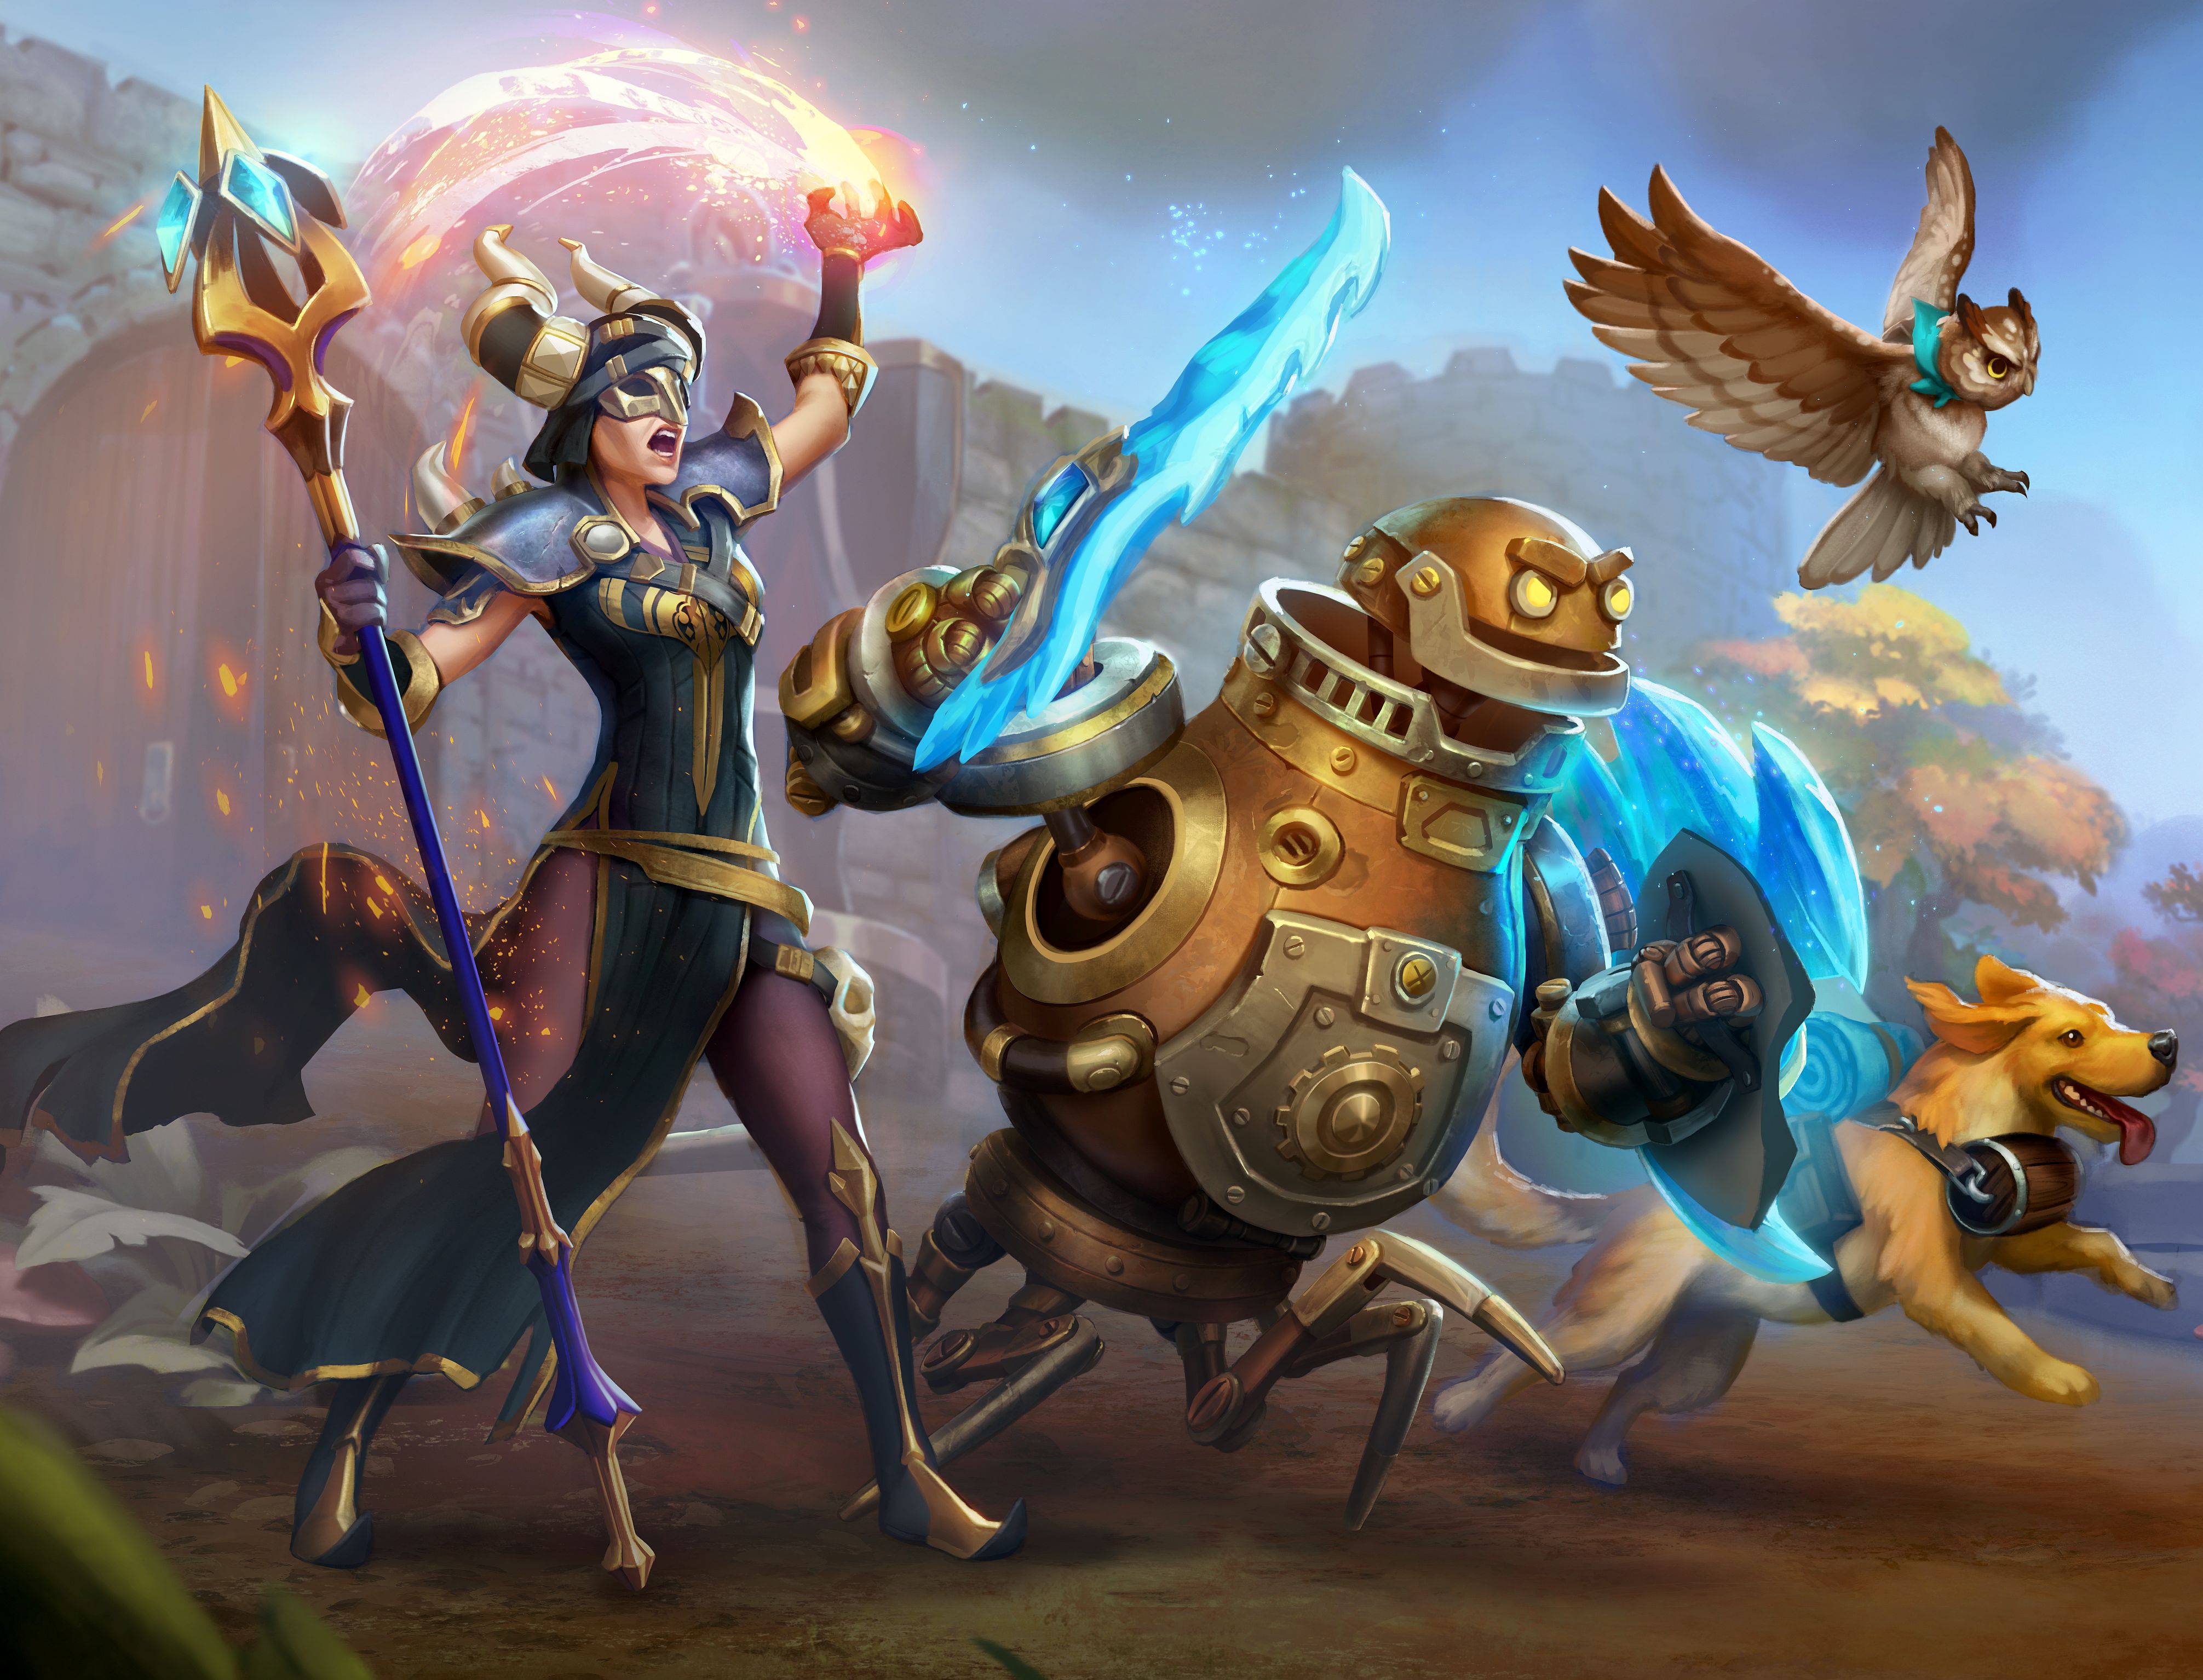 Image for Torchlight series returns with shared-world action-RPG Torchlight Frontiers